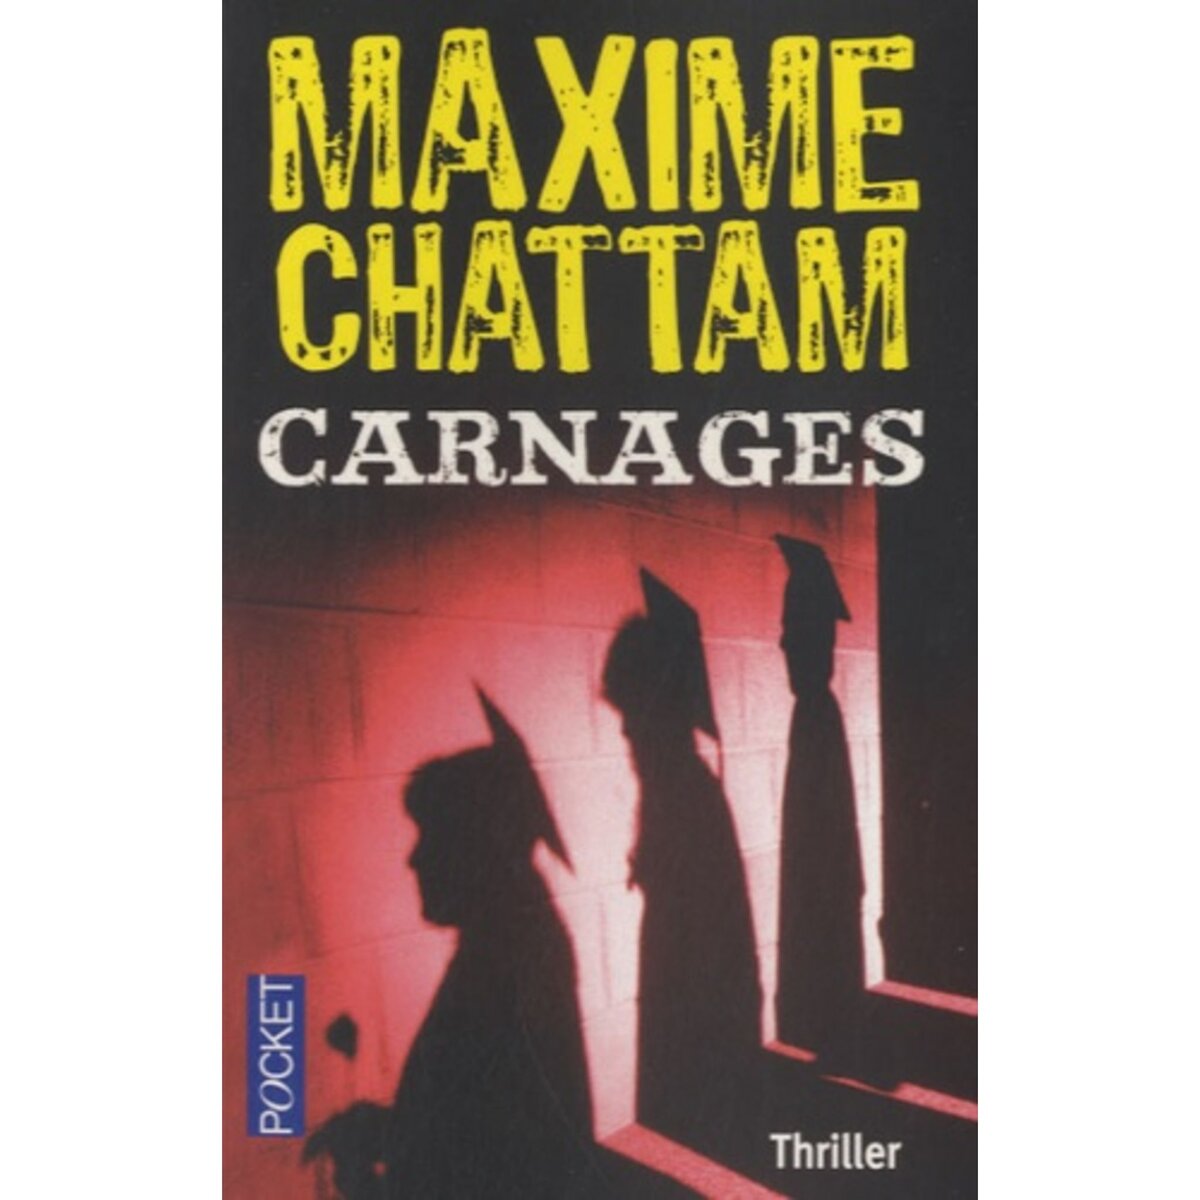  CARNAGES, Chattam Maxime